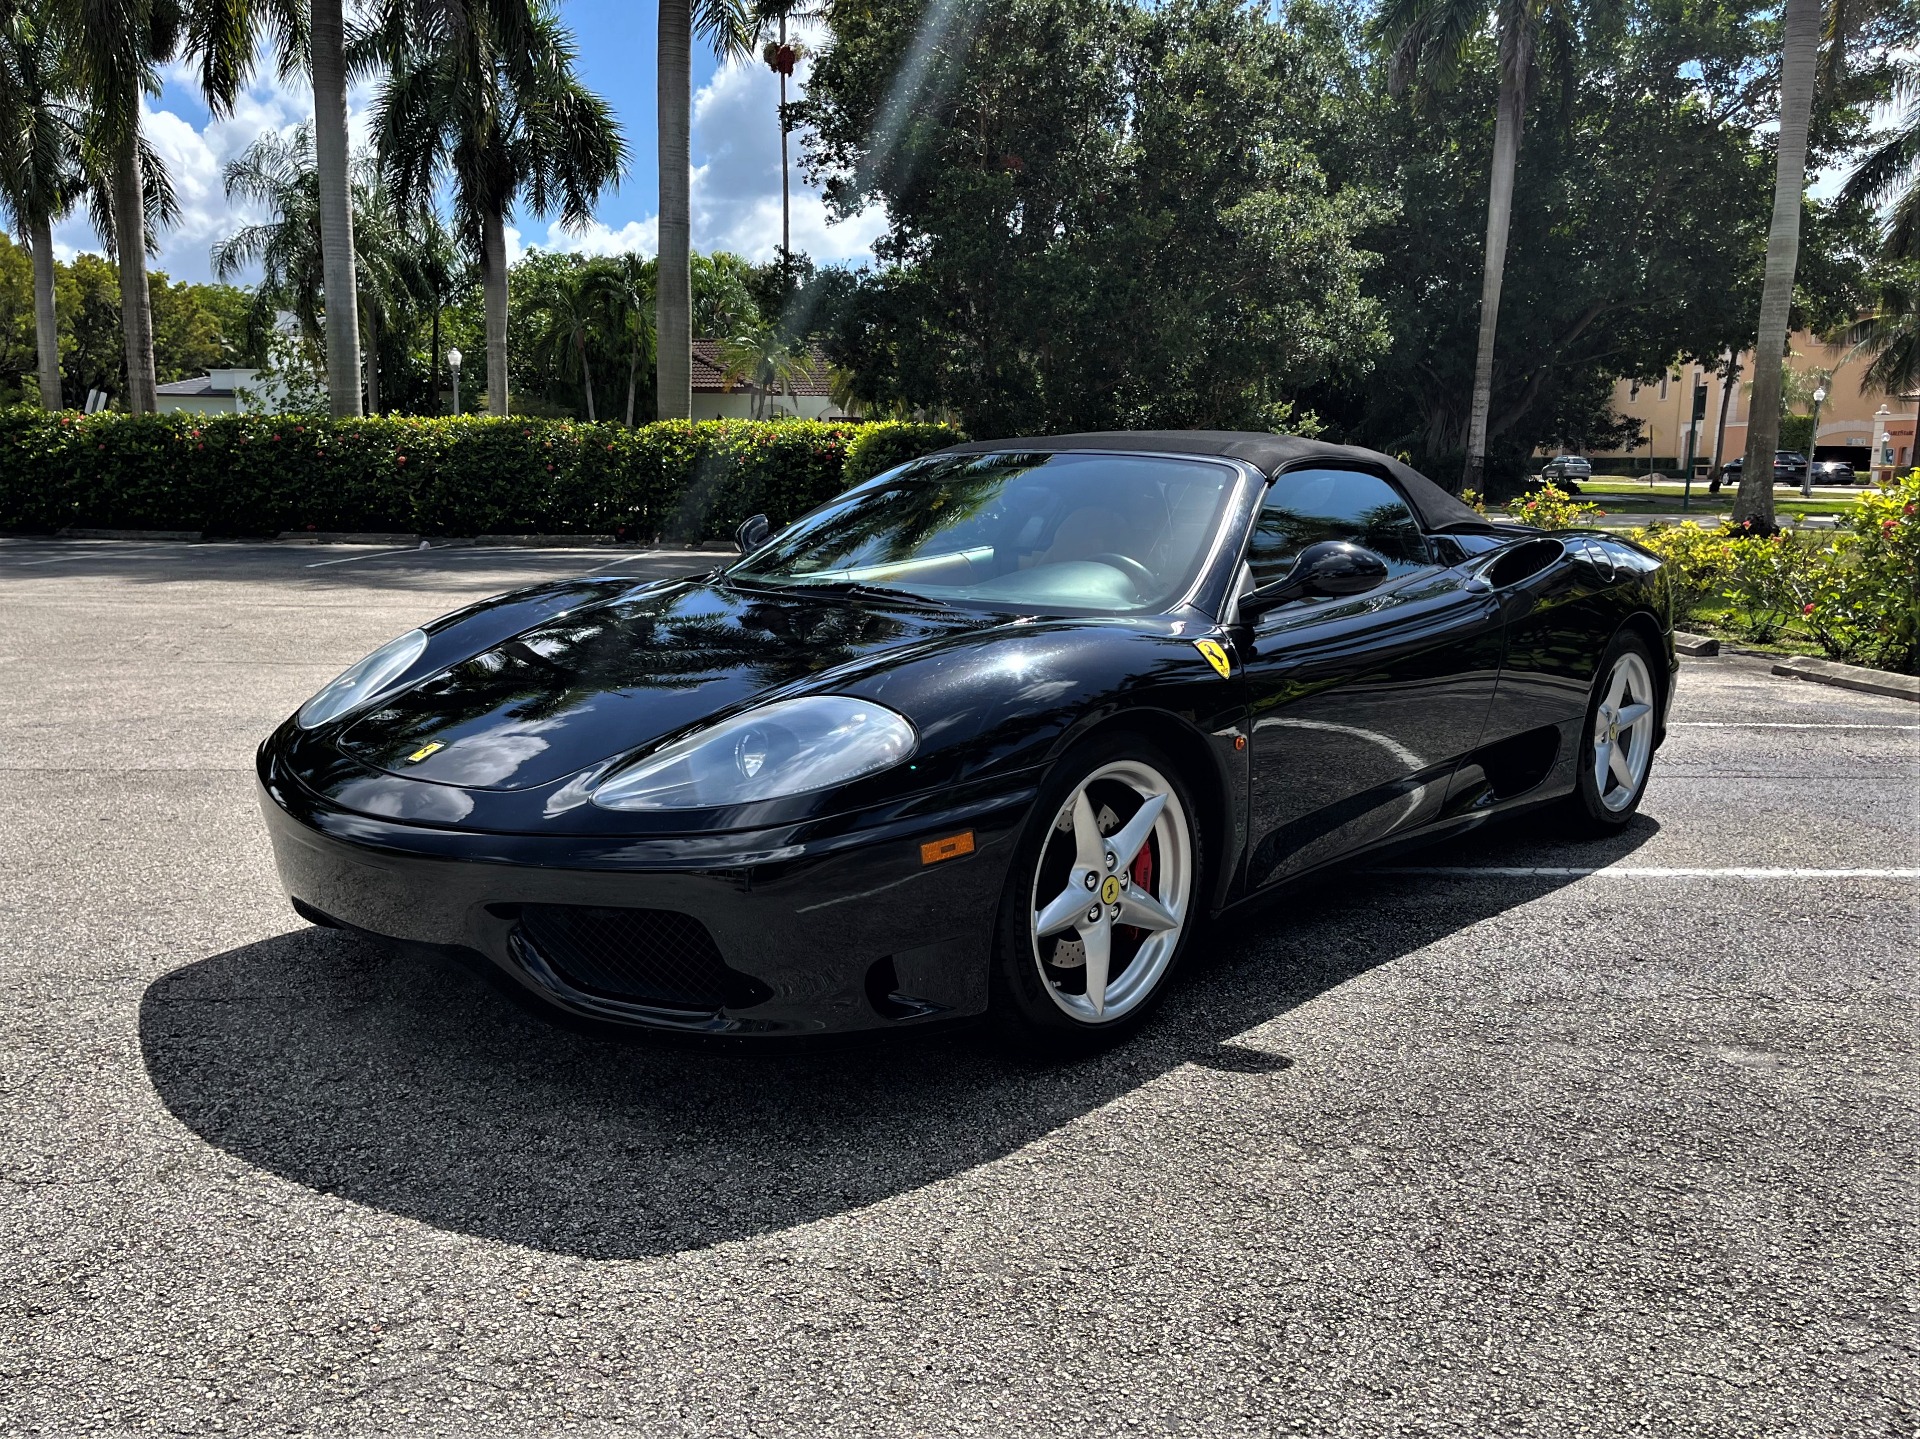 Used 2003 Ferrari 360 Spider for sale $74,850 at The Gables Sports Cars in Miami FL 33146 2